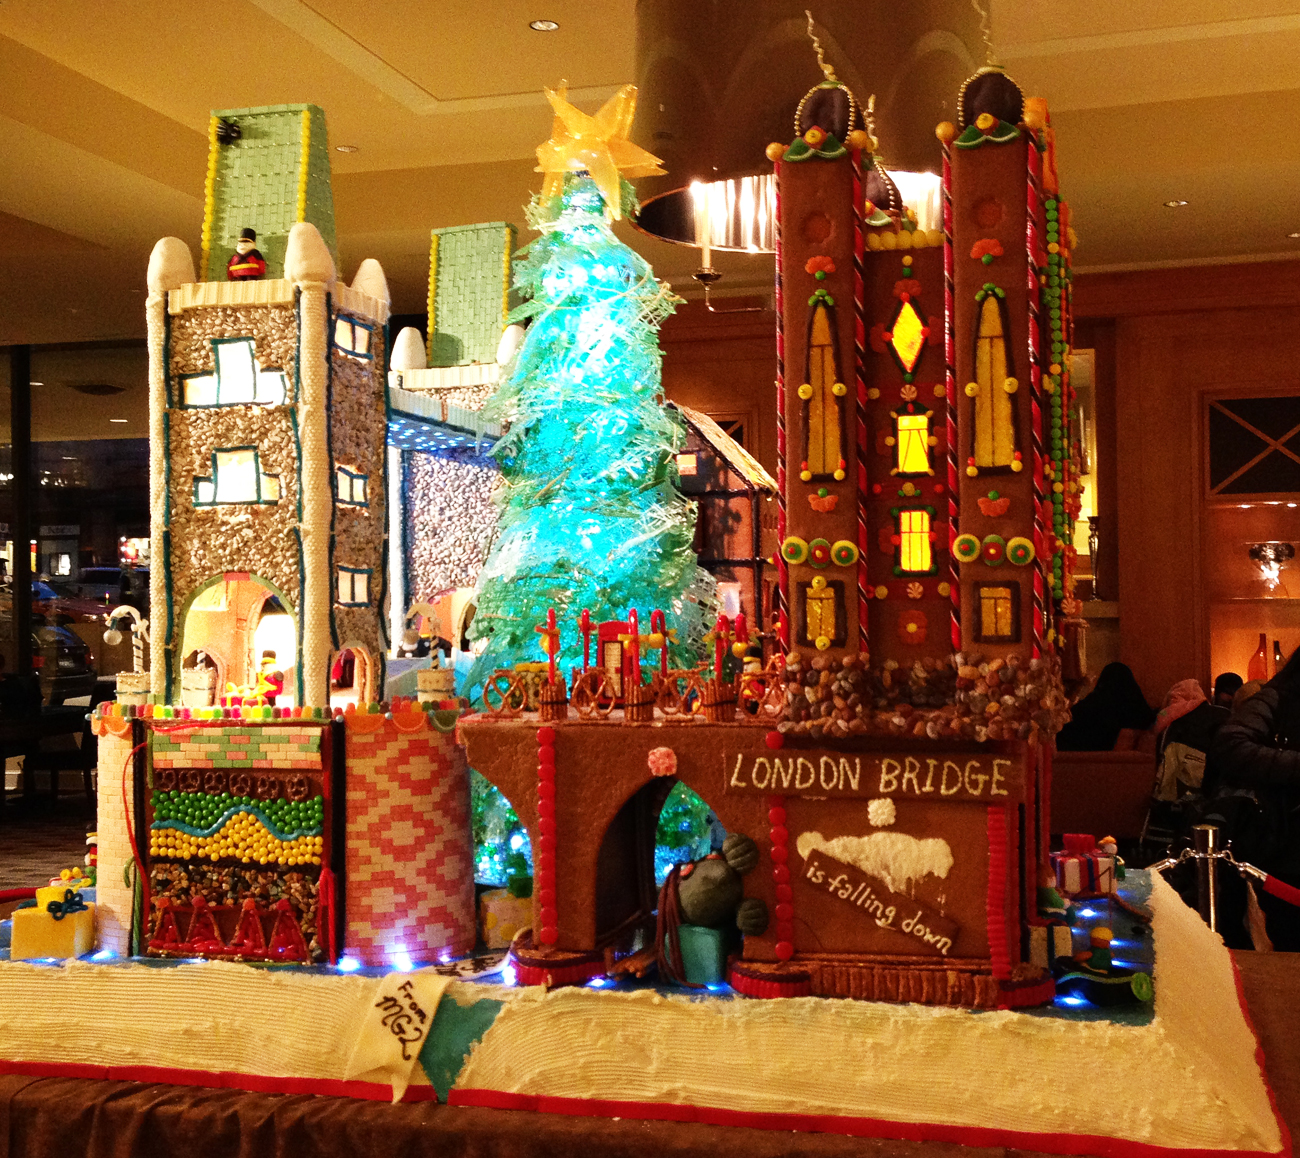 Seattle Gingerbread House London Bridge is Falling by MulvannyG2 Architecture